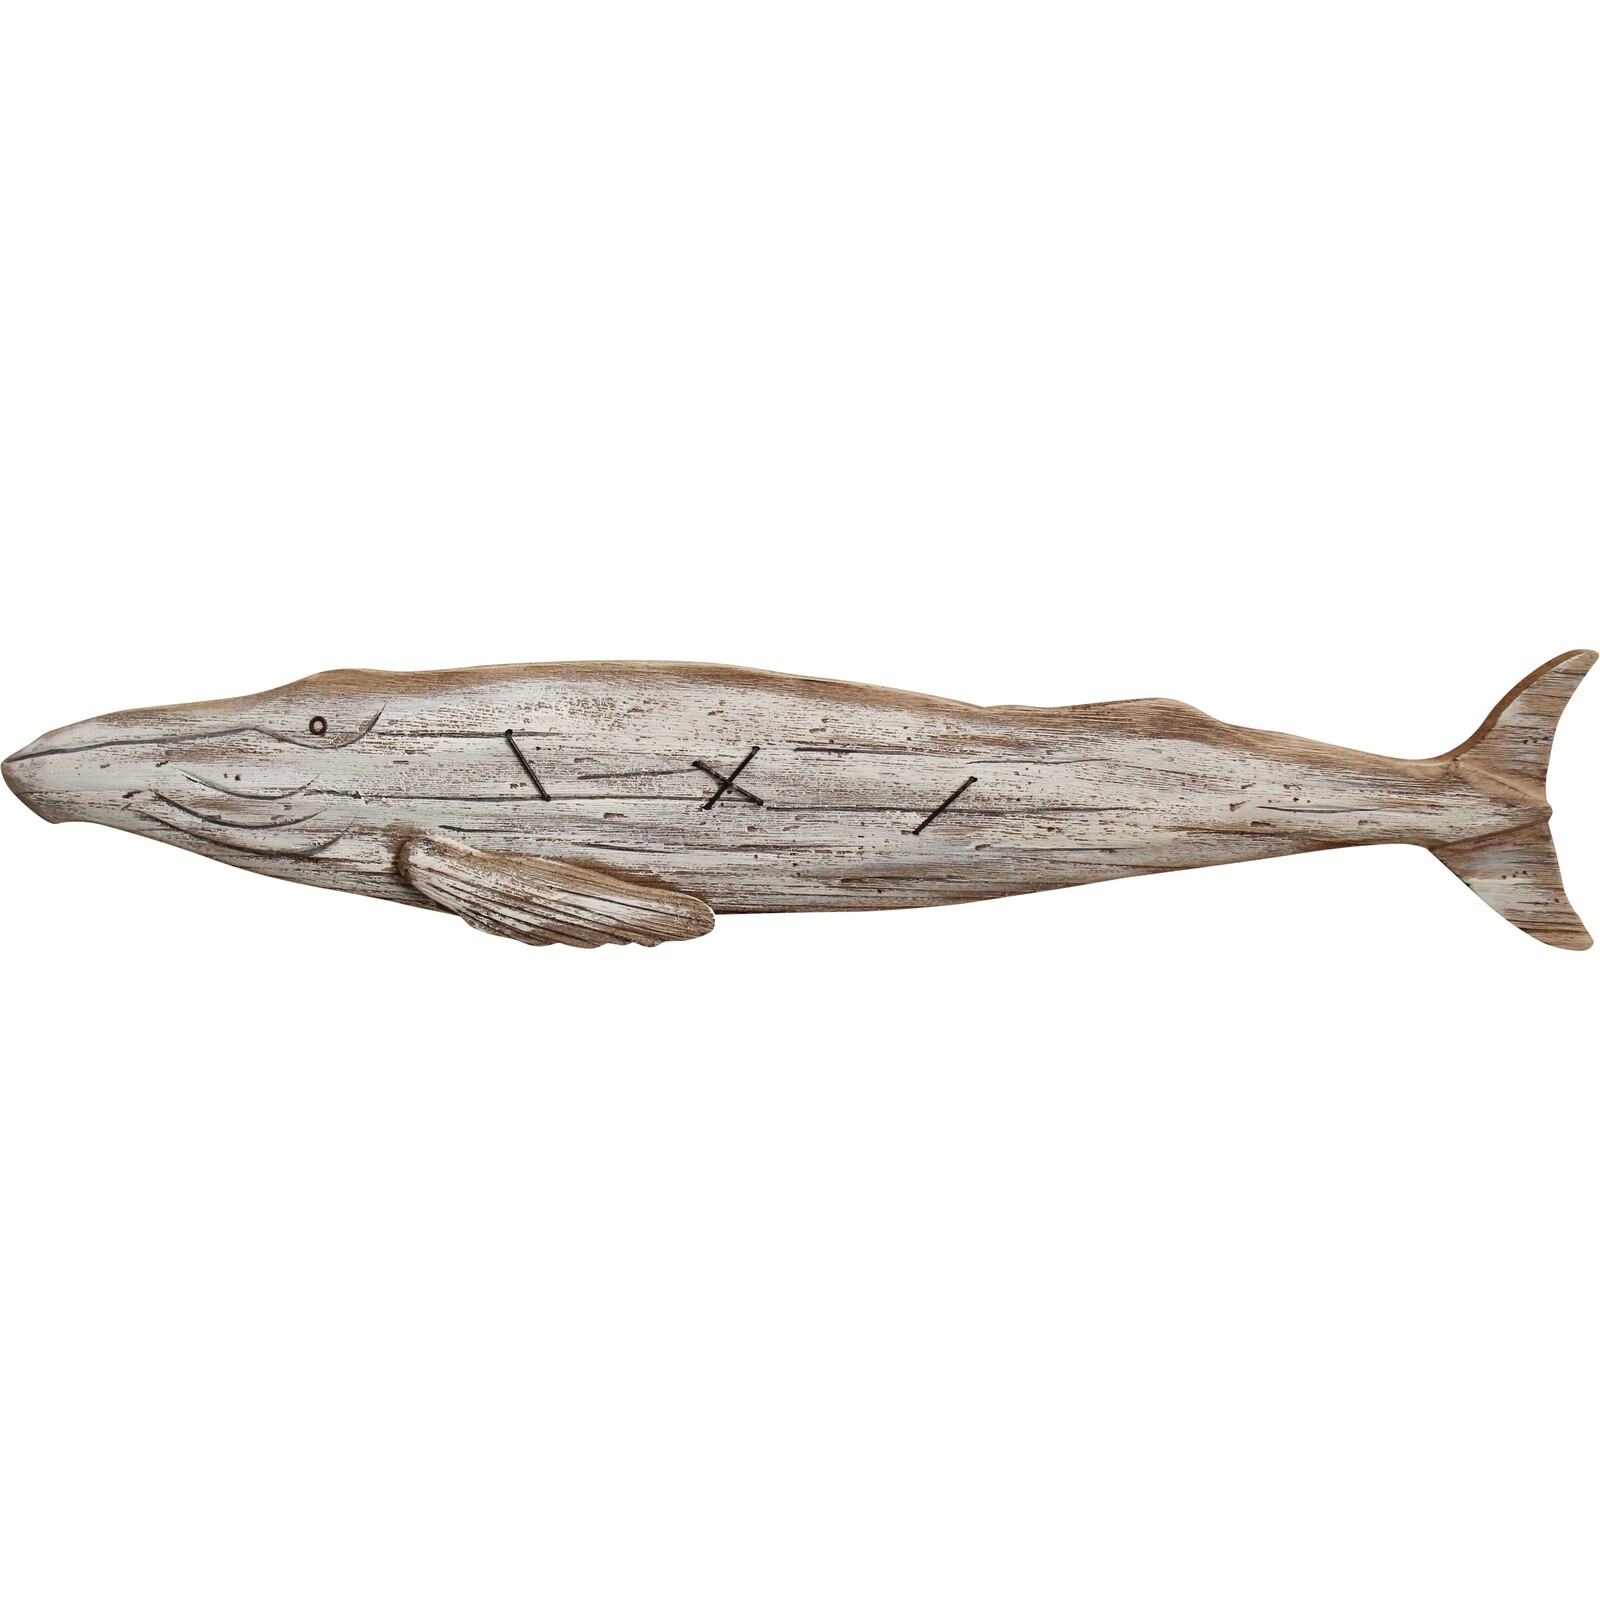 Rustic Reclaimed Timber Decorative Whale Wall Decor